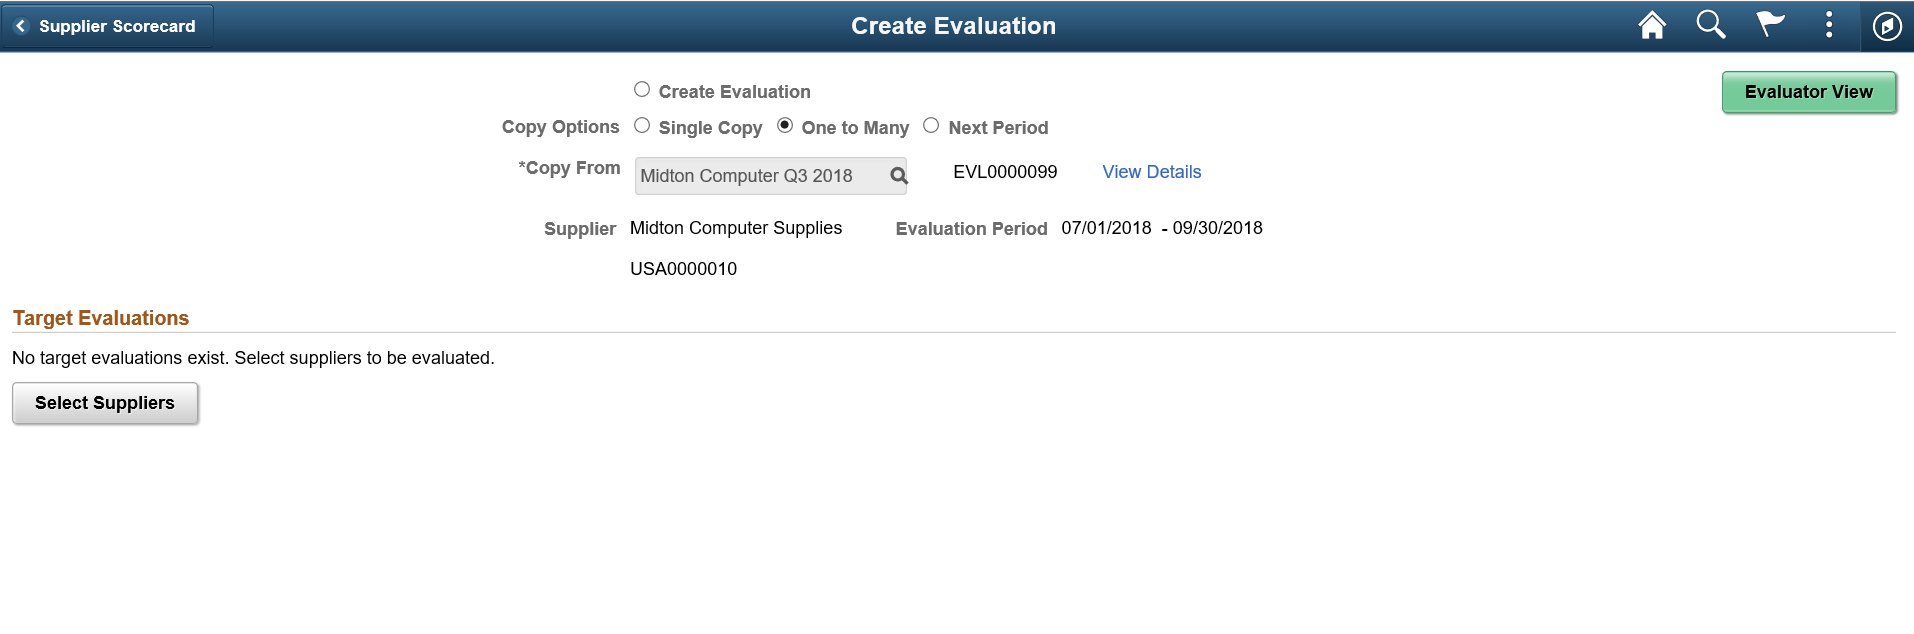 Create Evaluation page - One to Many Option (page 1 of 2)